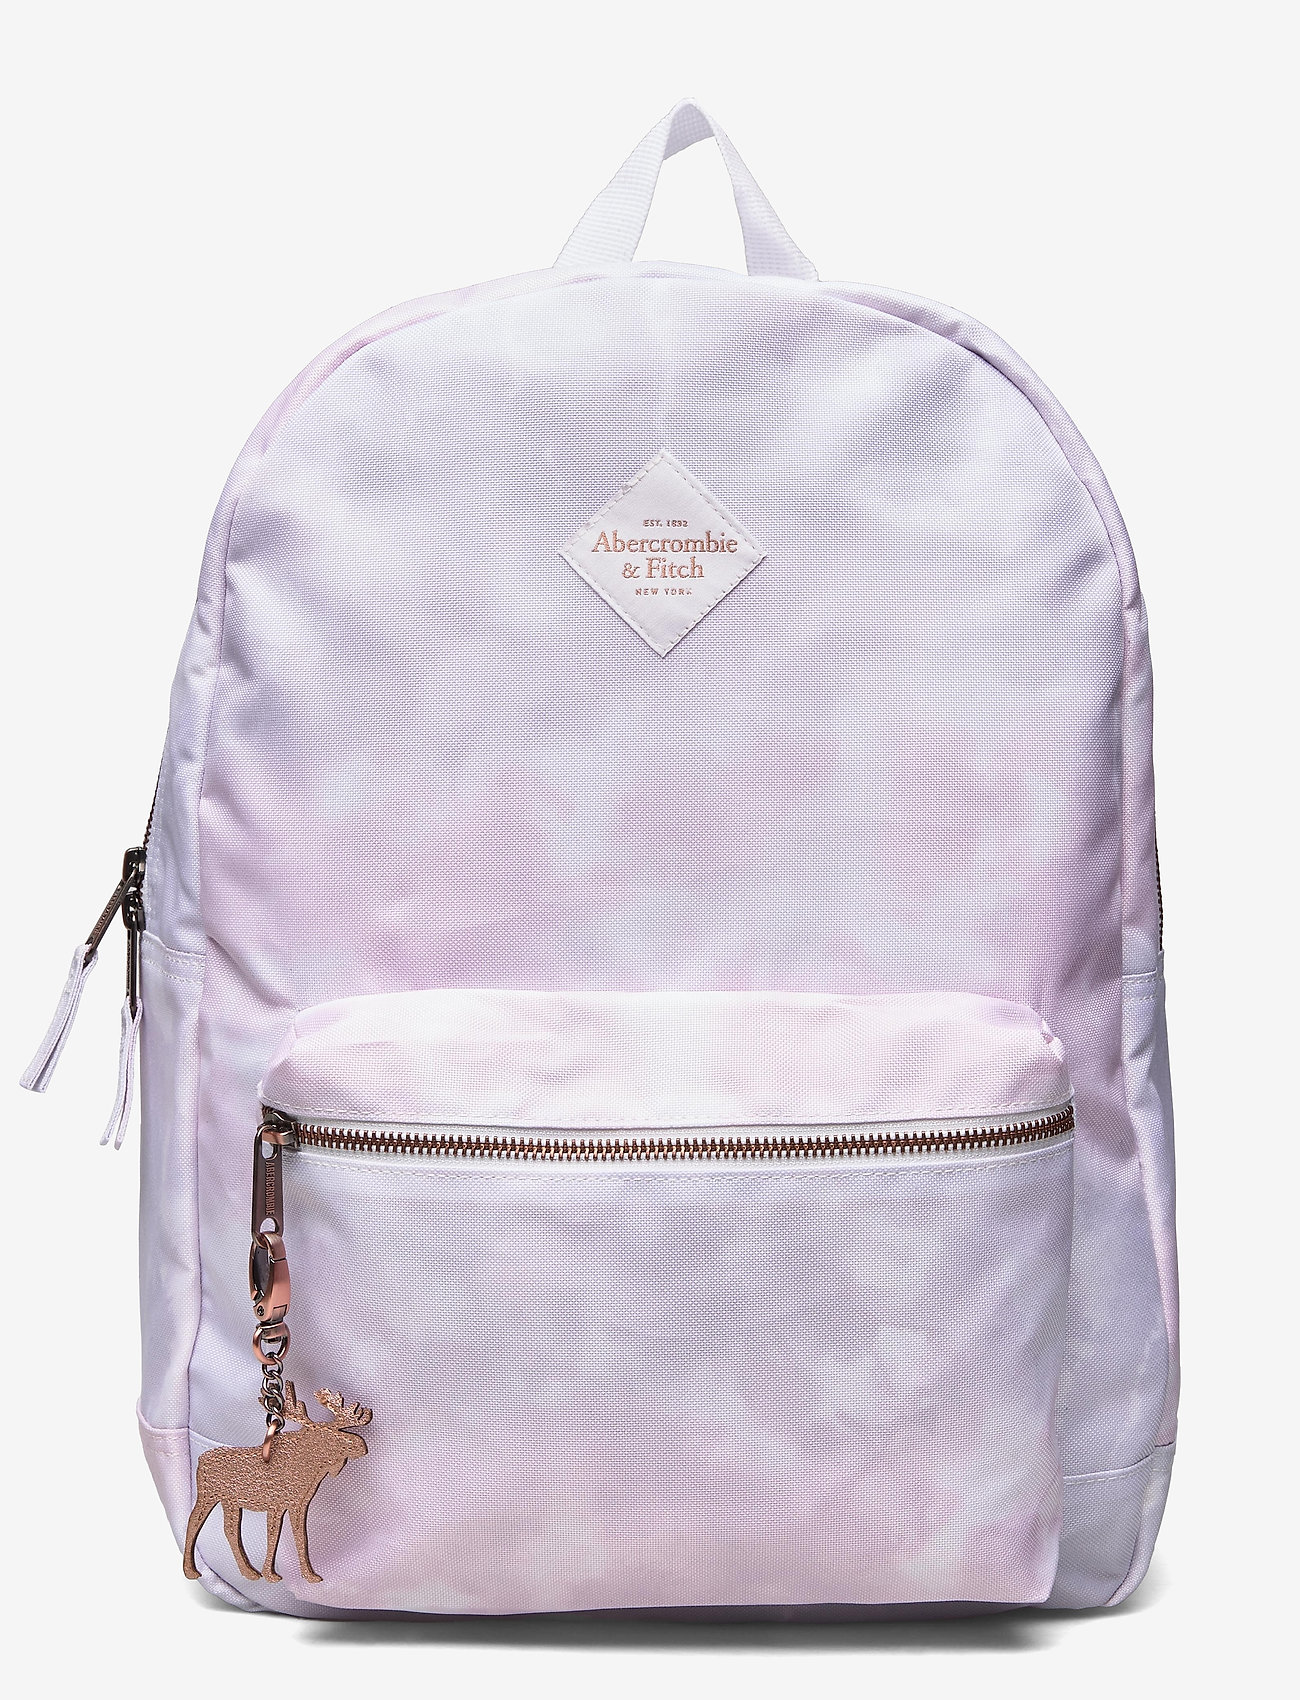 Backpack (Light Turquoise) (39.20 